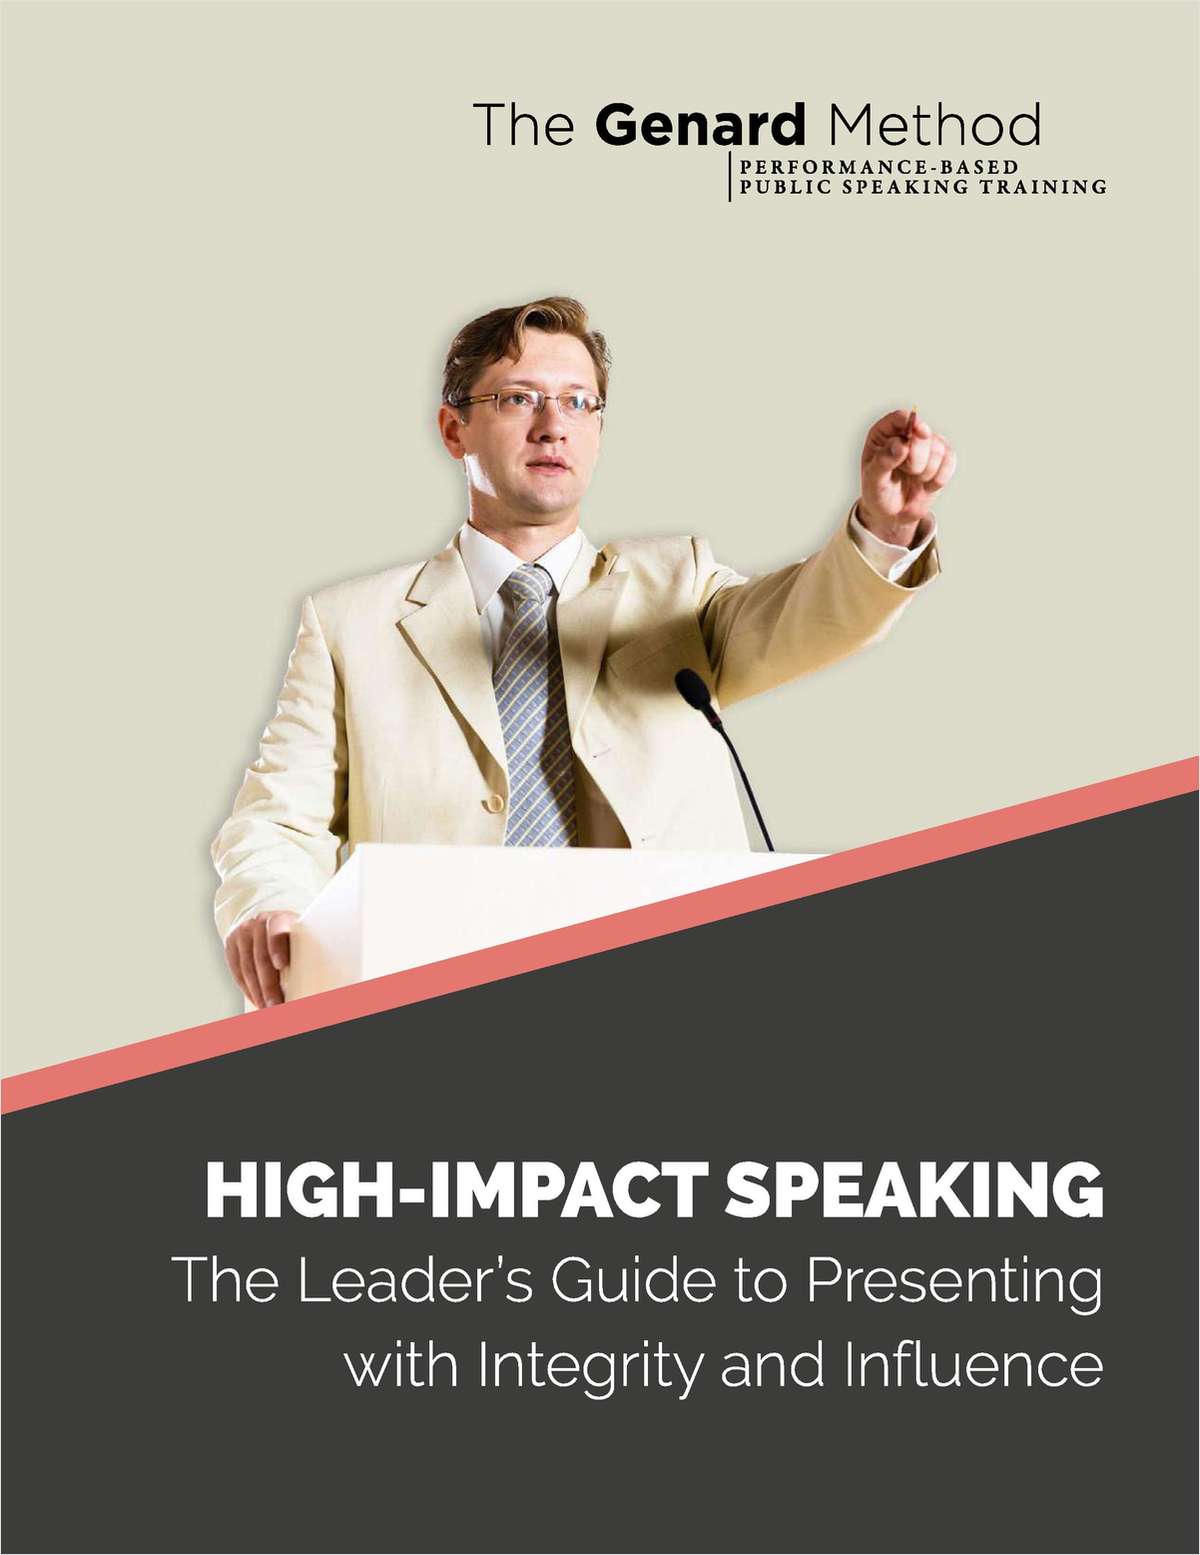 HIGH-IMPACT SPEAKING: The  Leader's Guide to Presenting with Integrity and Influence